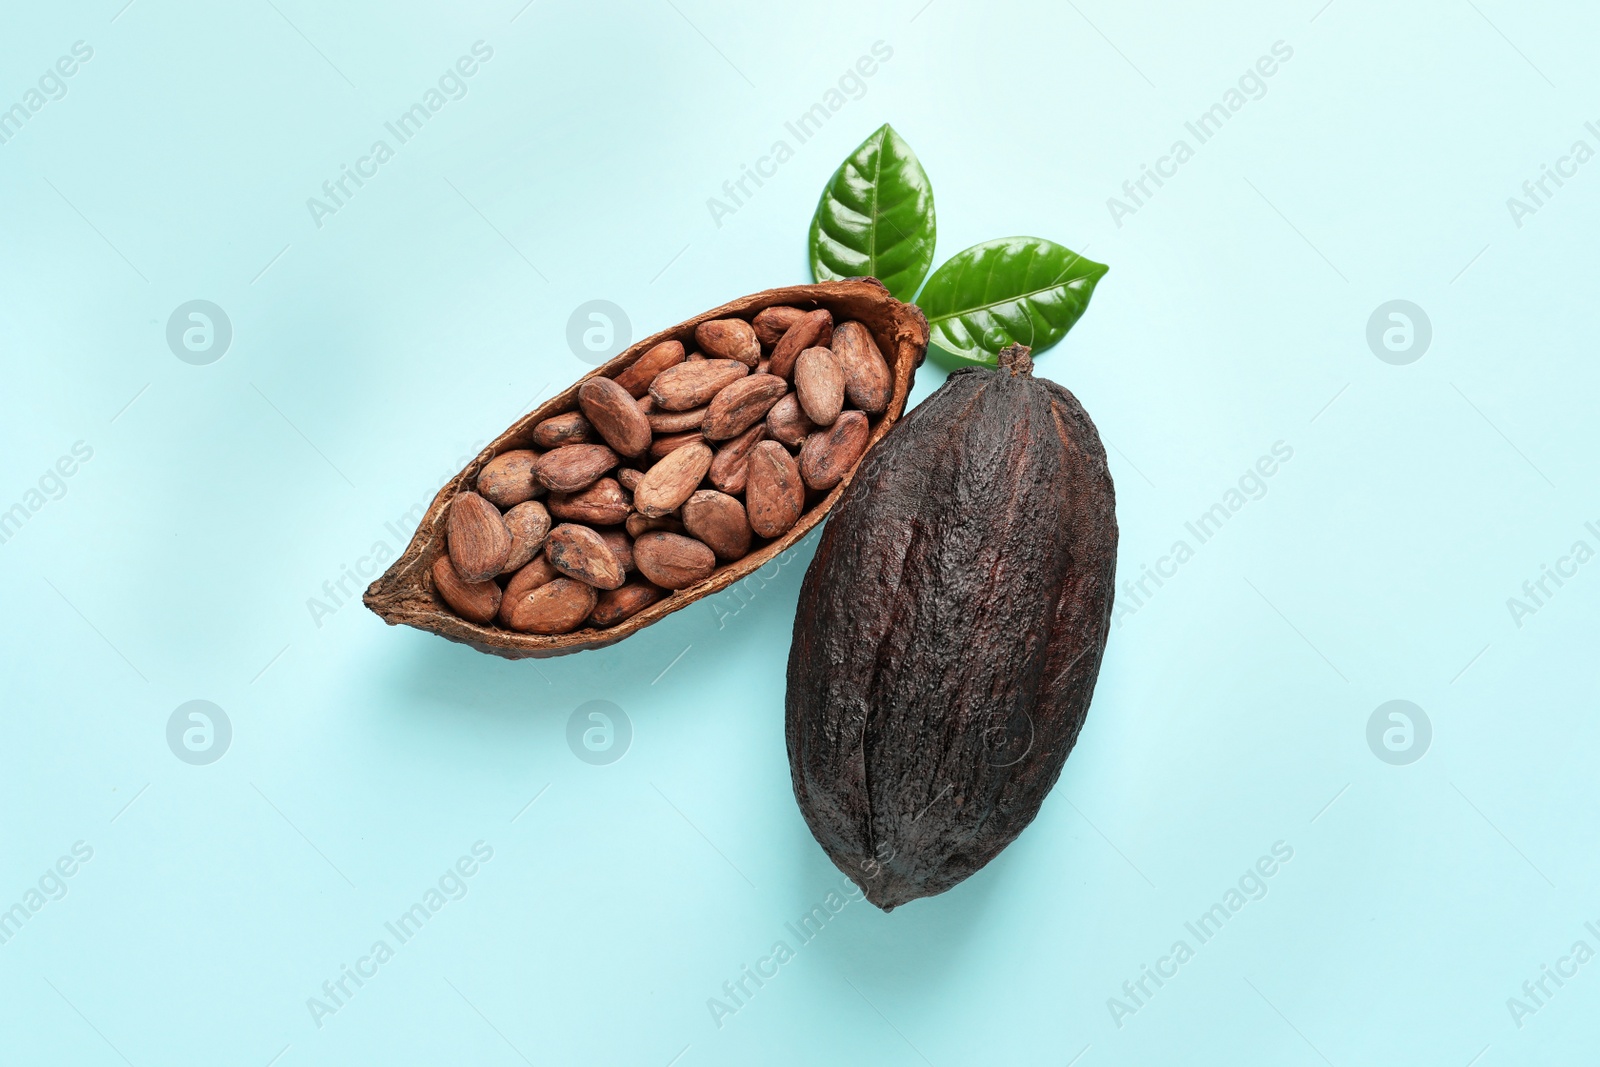 Photo of Cocoa pods and beans on light blue background, flat lay